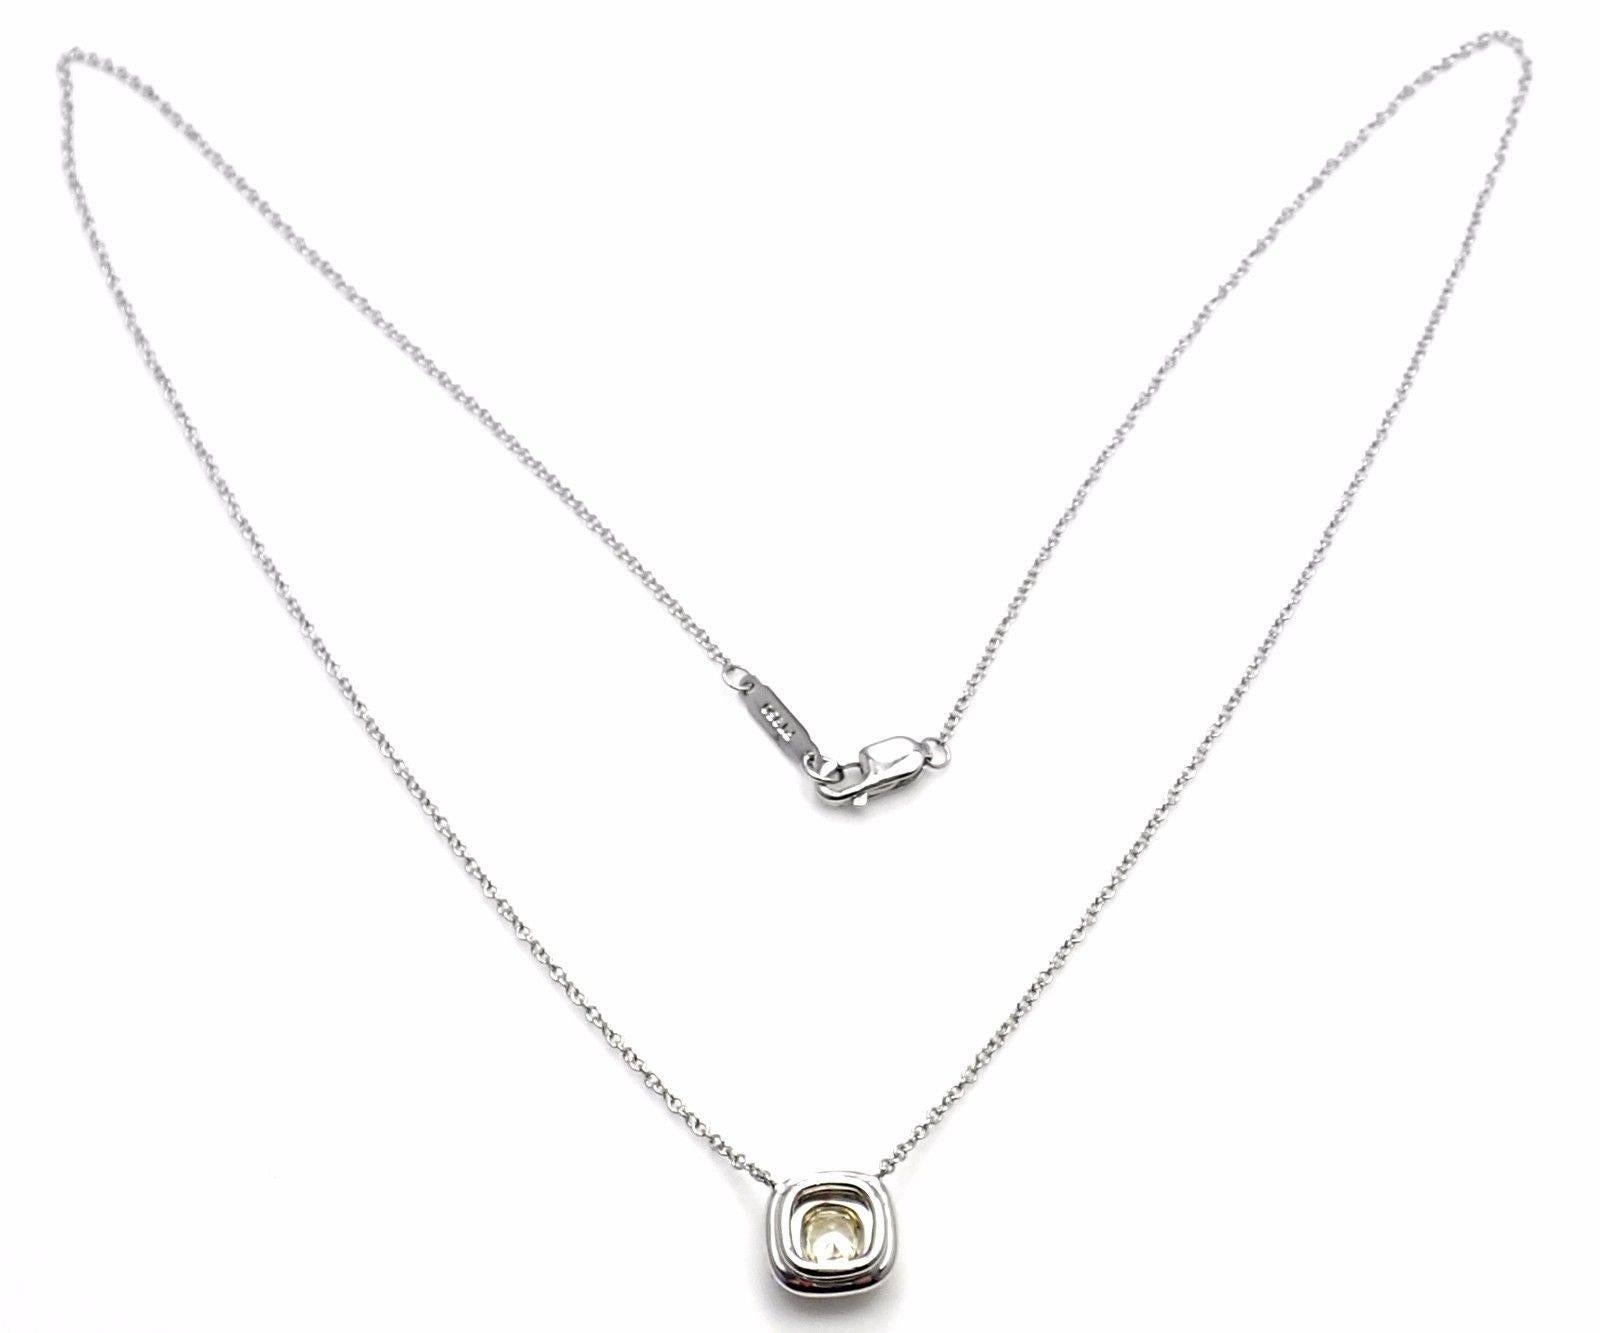 Women's or Men's Tiffany & Co. Soleste Yellow and White Diamond Platinum and Gold Necklace